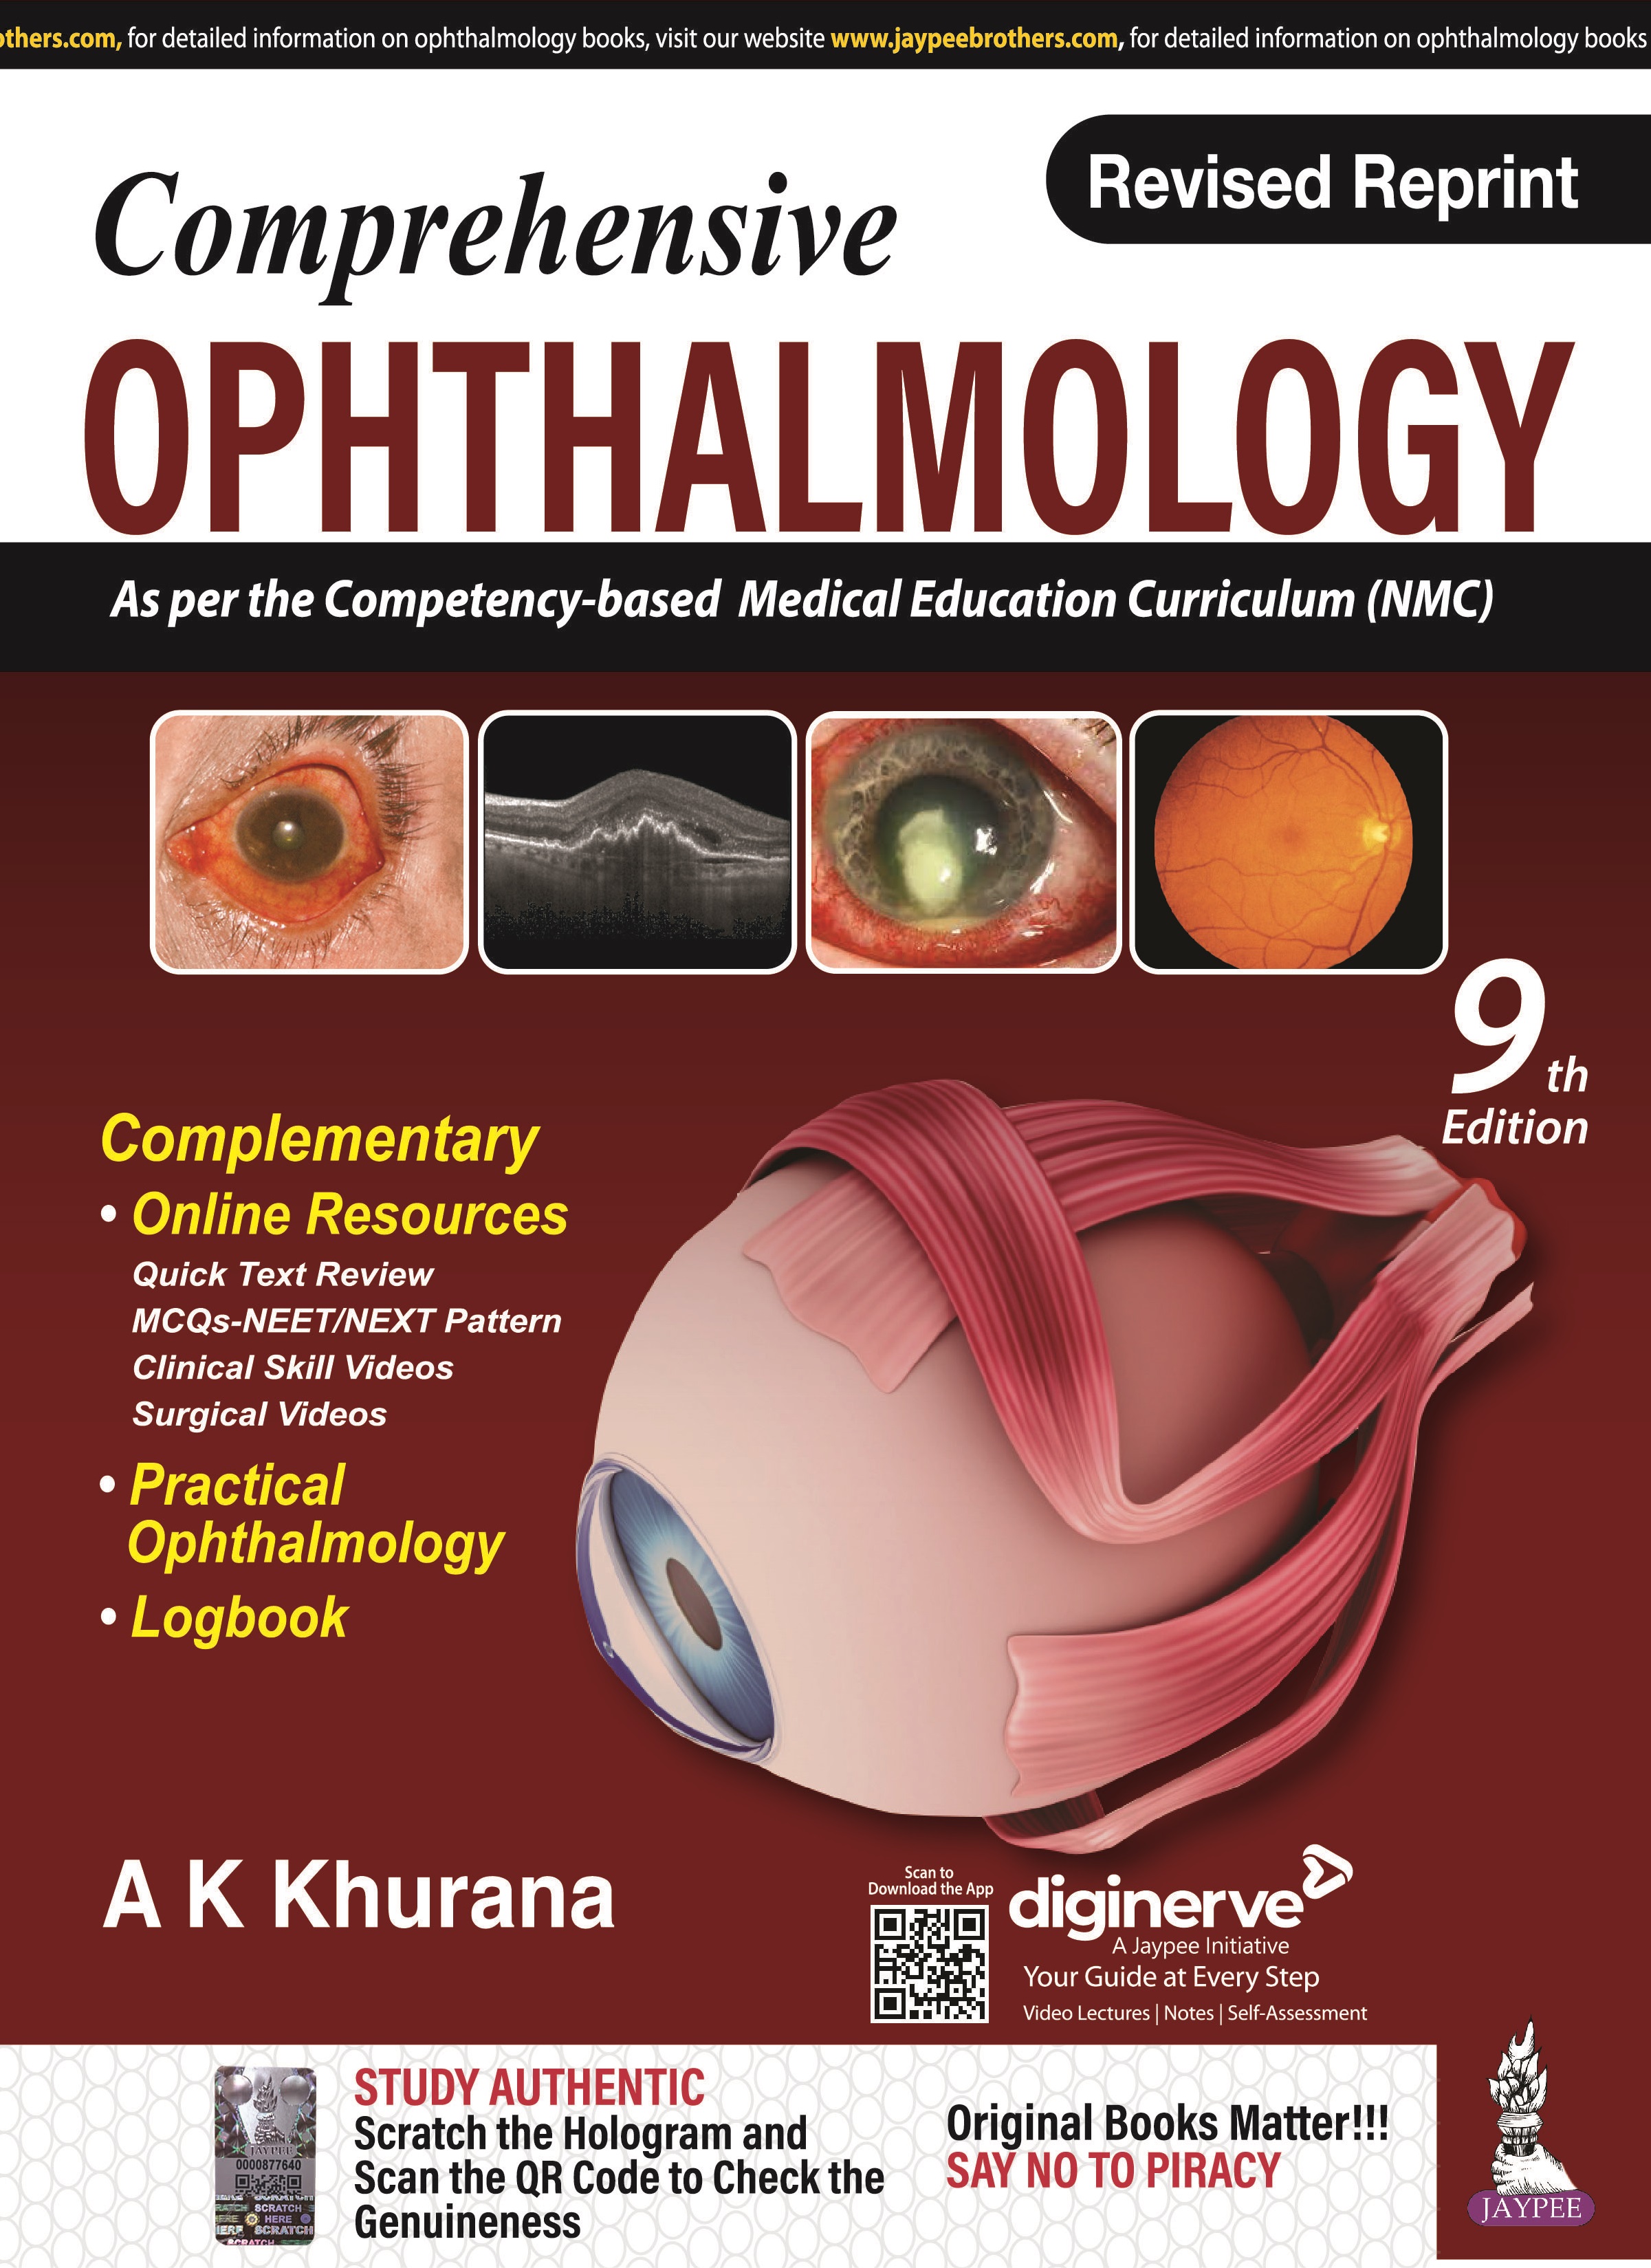 Comprehensive Ophthalmology With Ophthalmology Logbook Plus Practical Ophthalmology